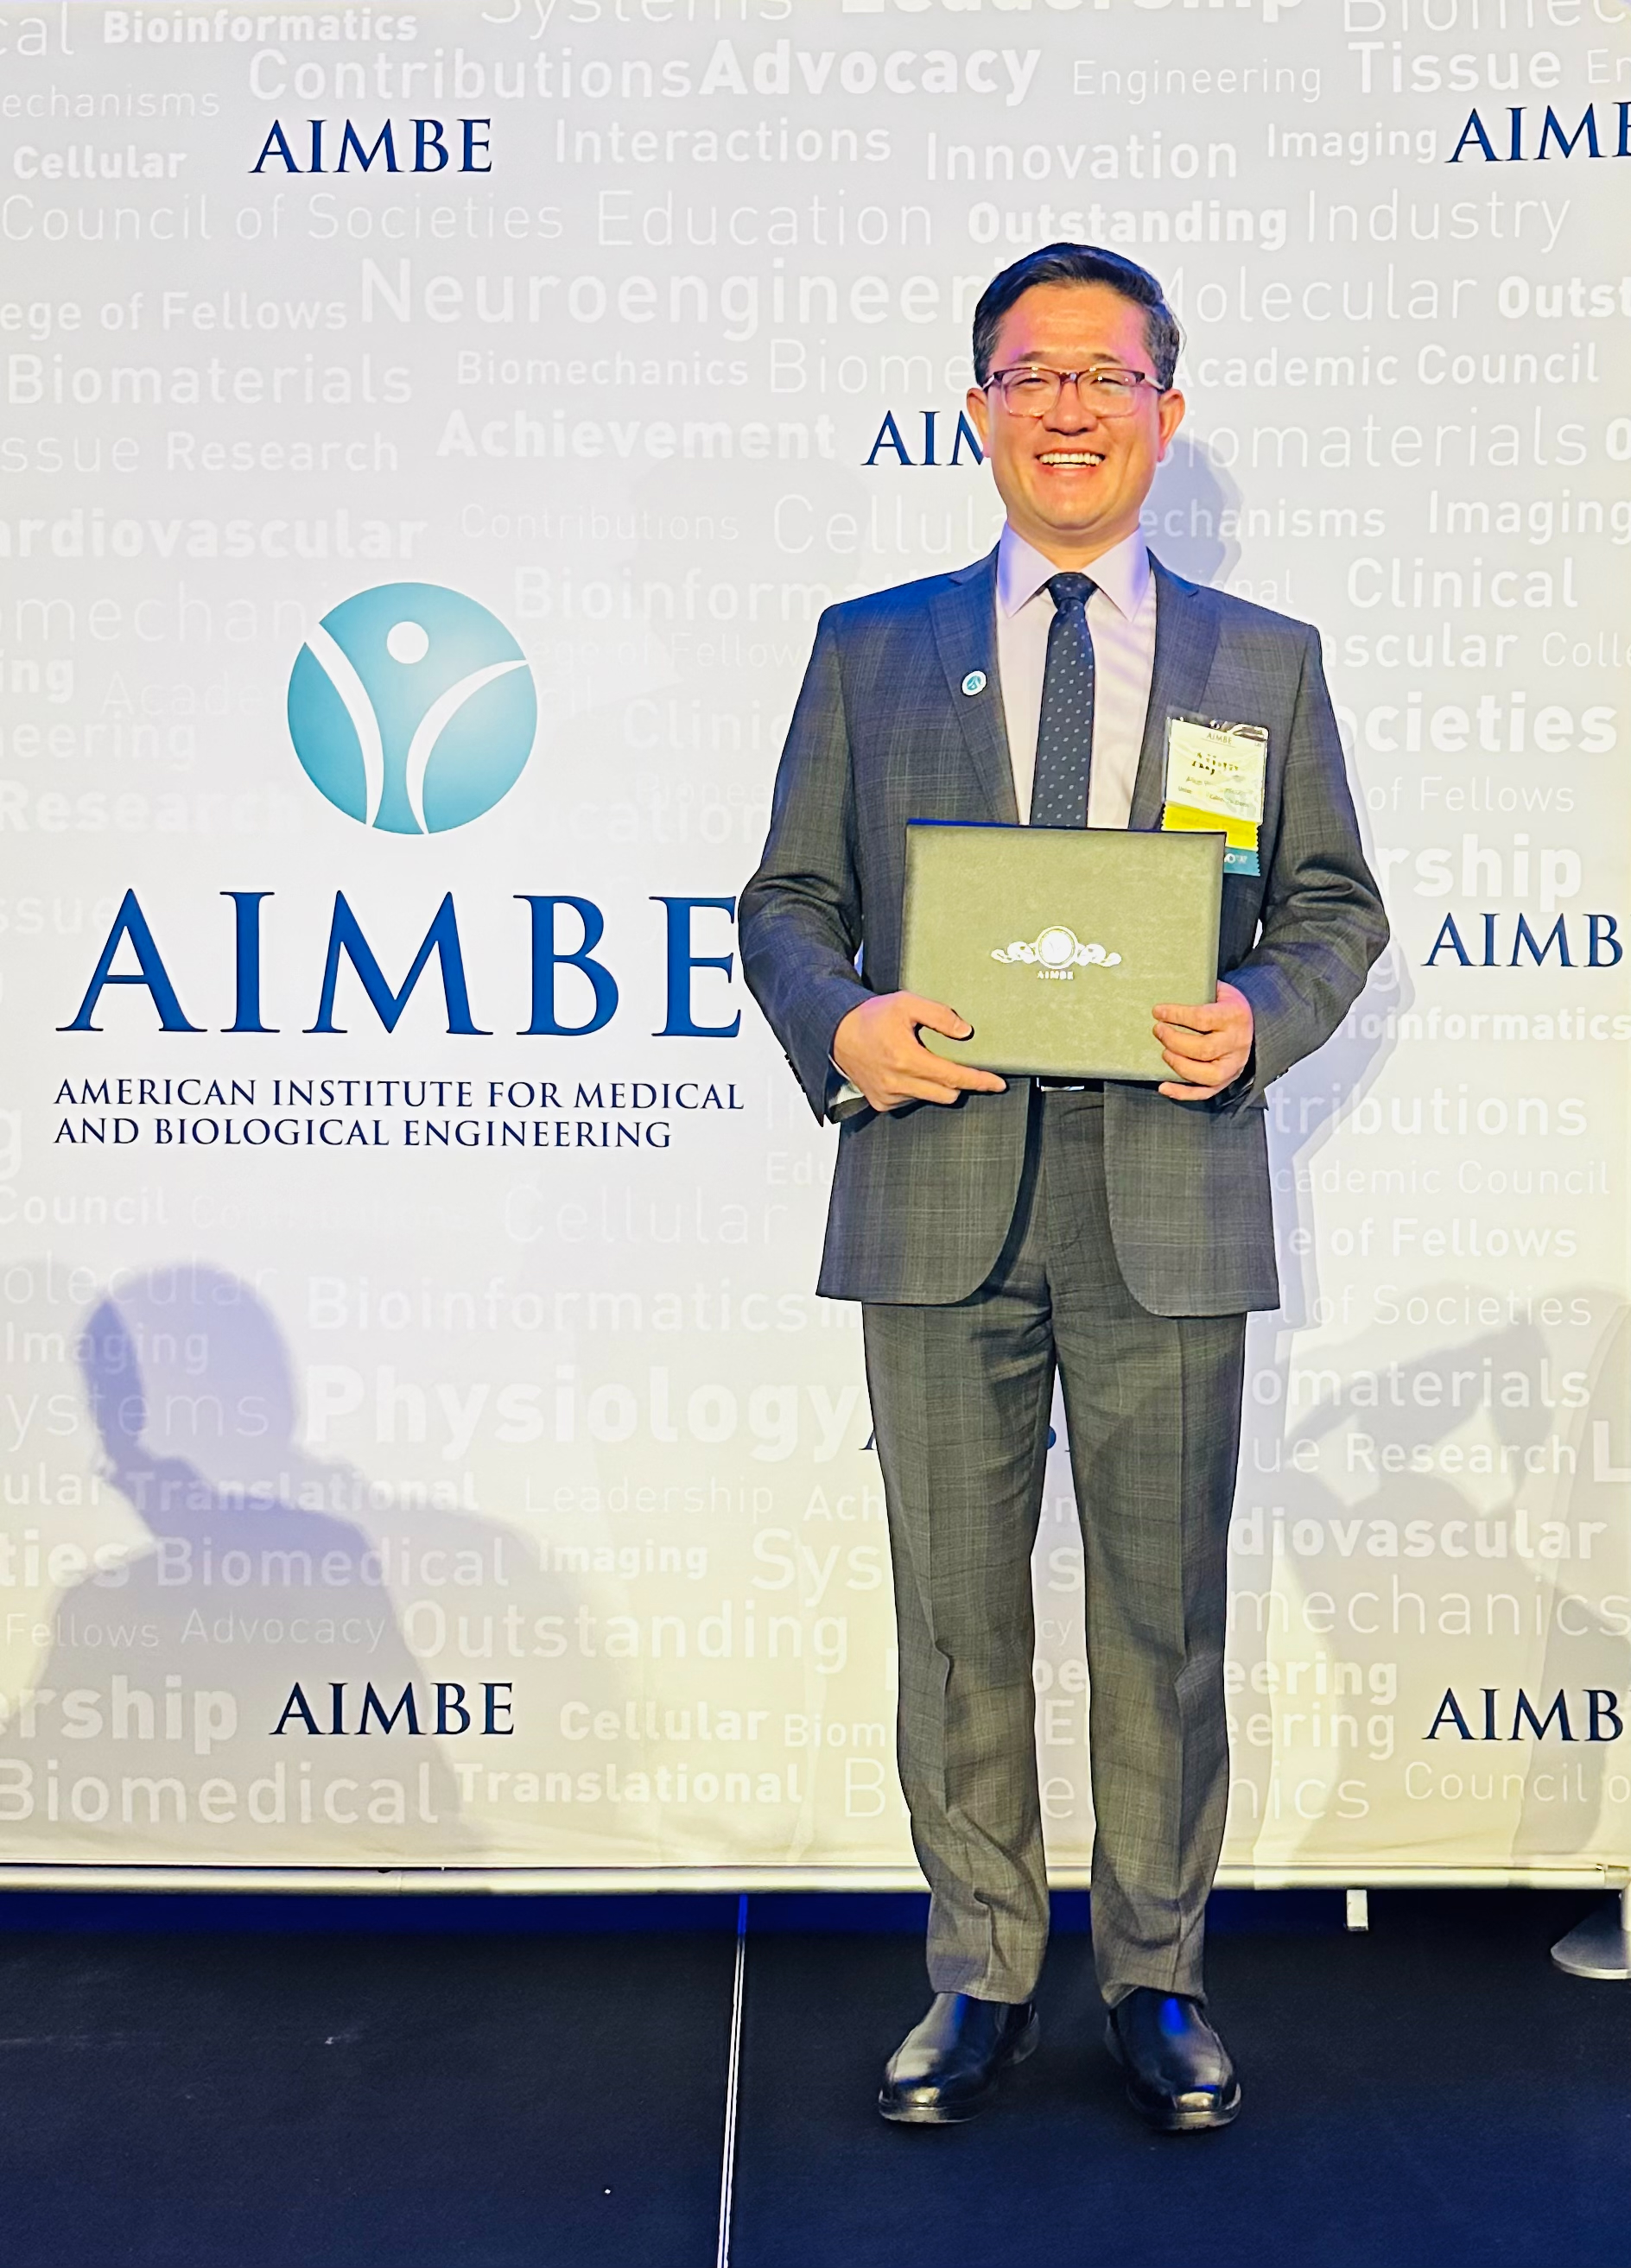 AIMBE Inducts Aijun Wang into College of Fellows for Outstanding Contributions